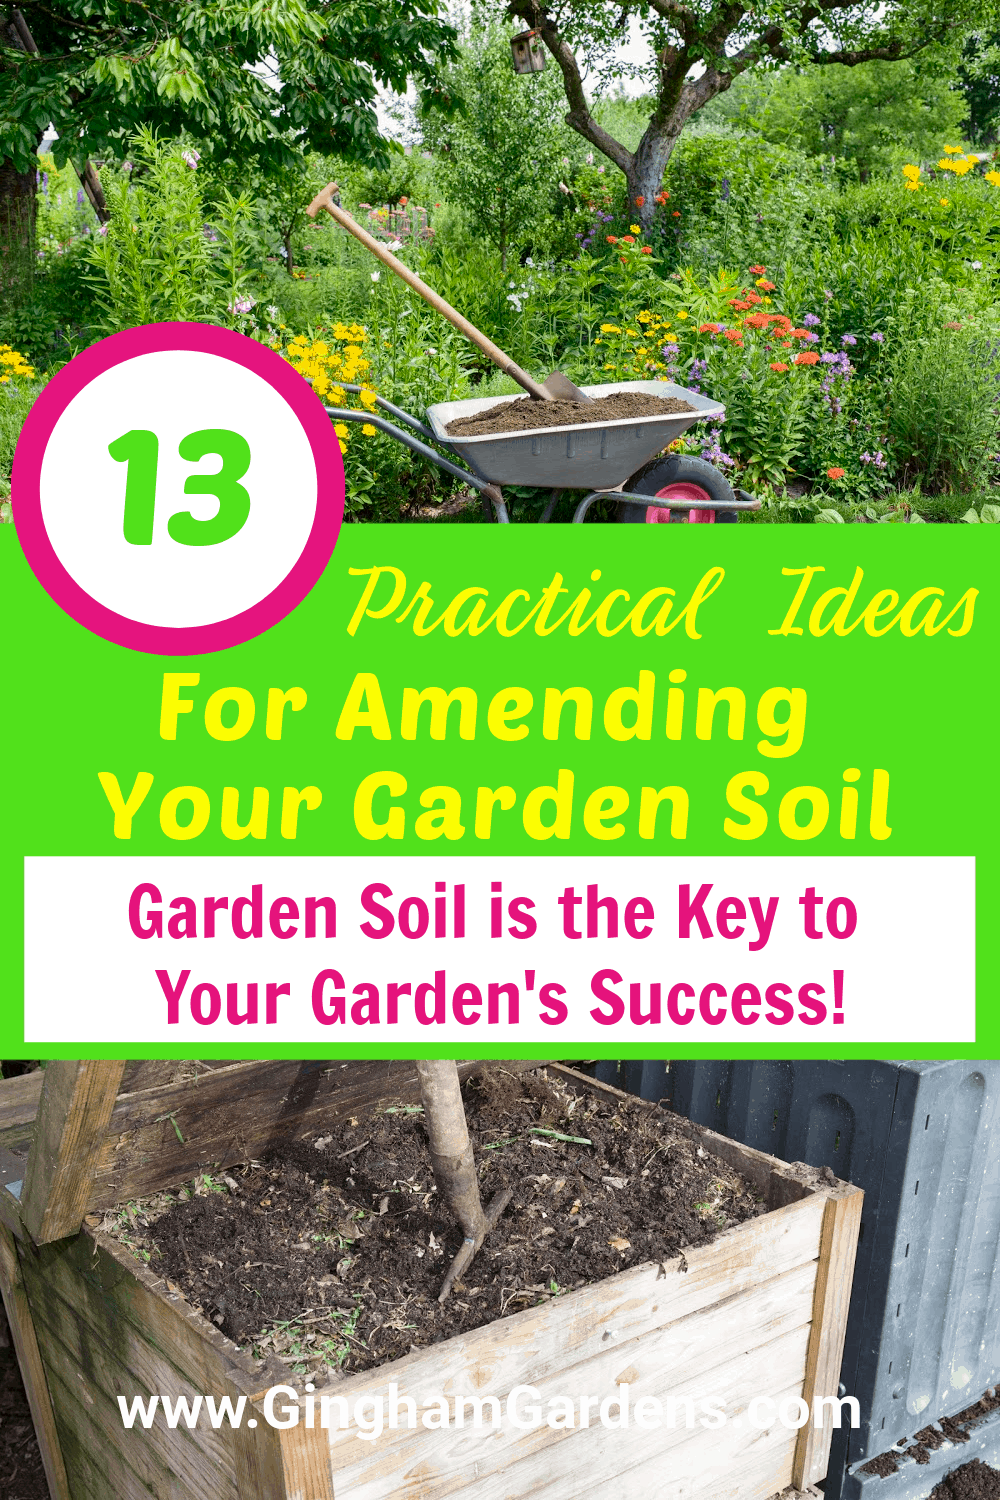 Images of a garden and compost bin with text overlay 13 practical ideas for Amending Your Garden Soil